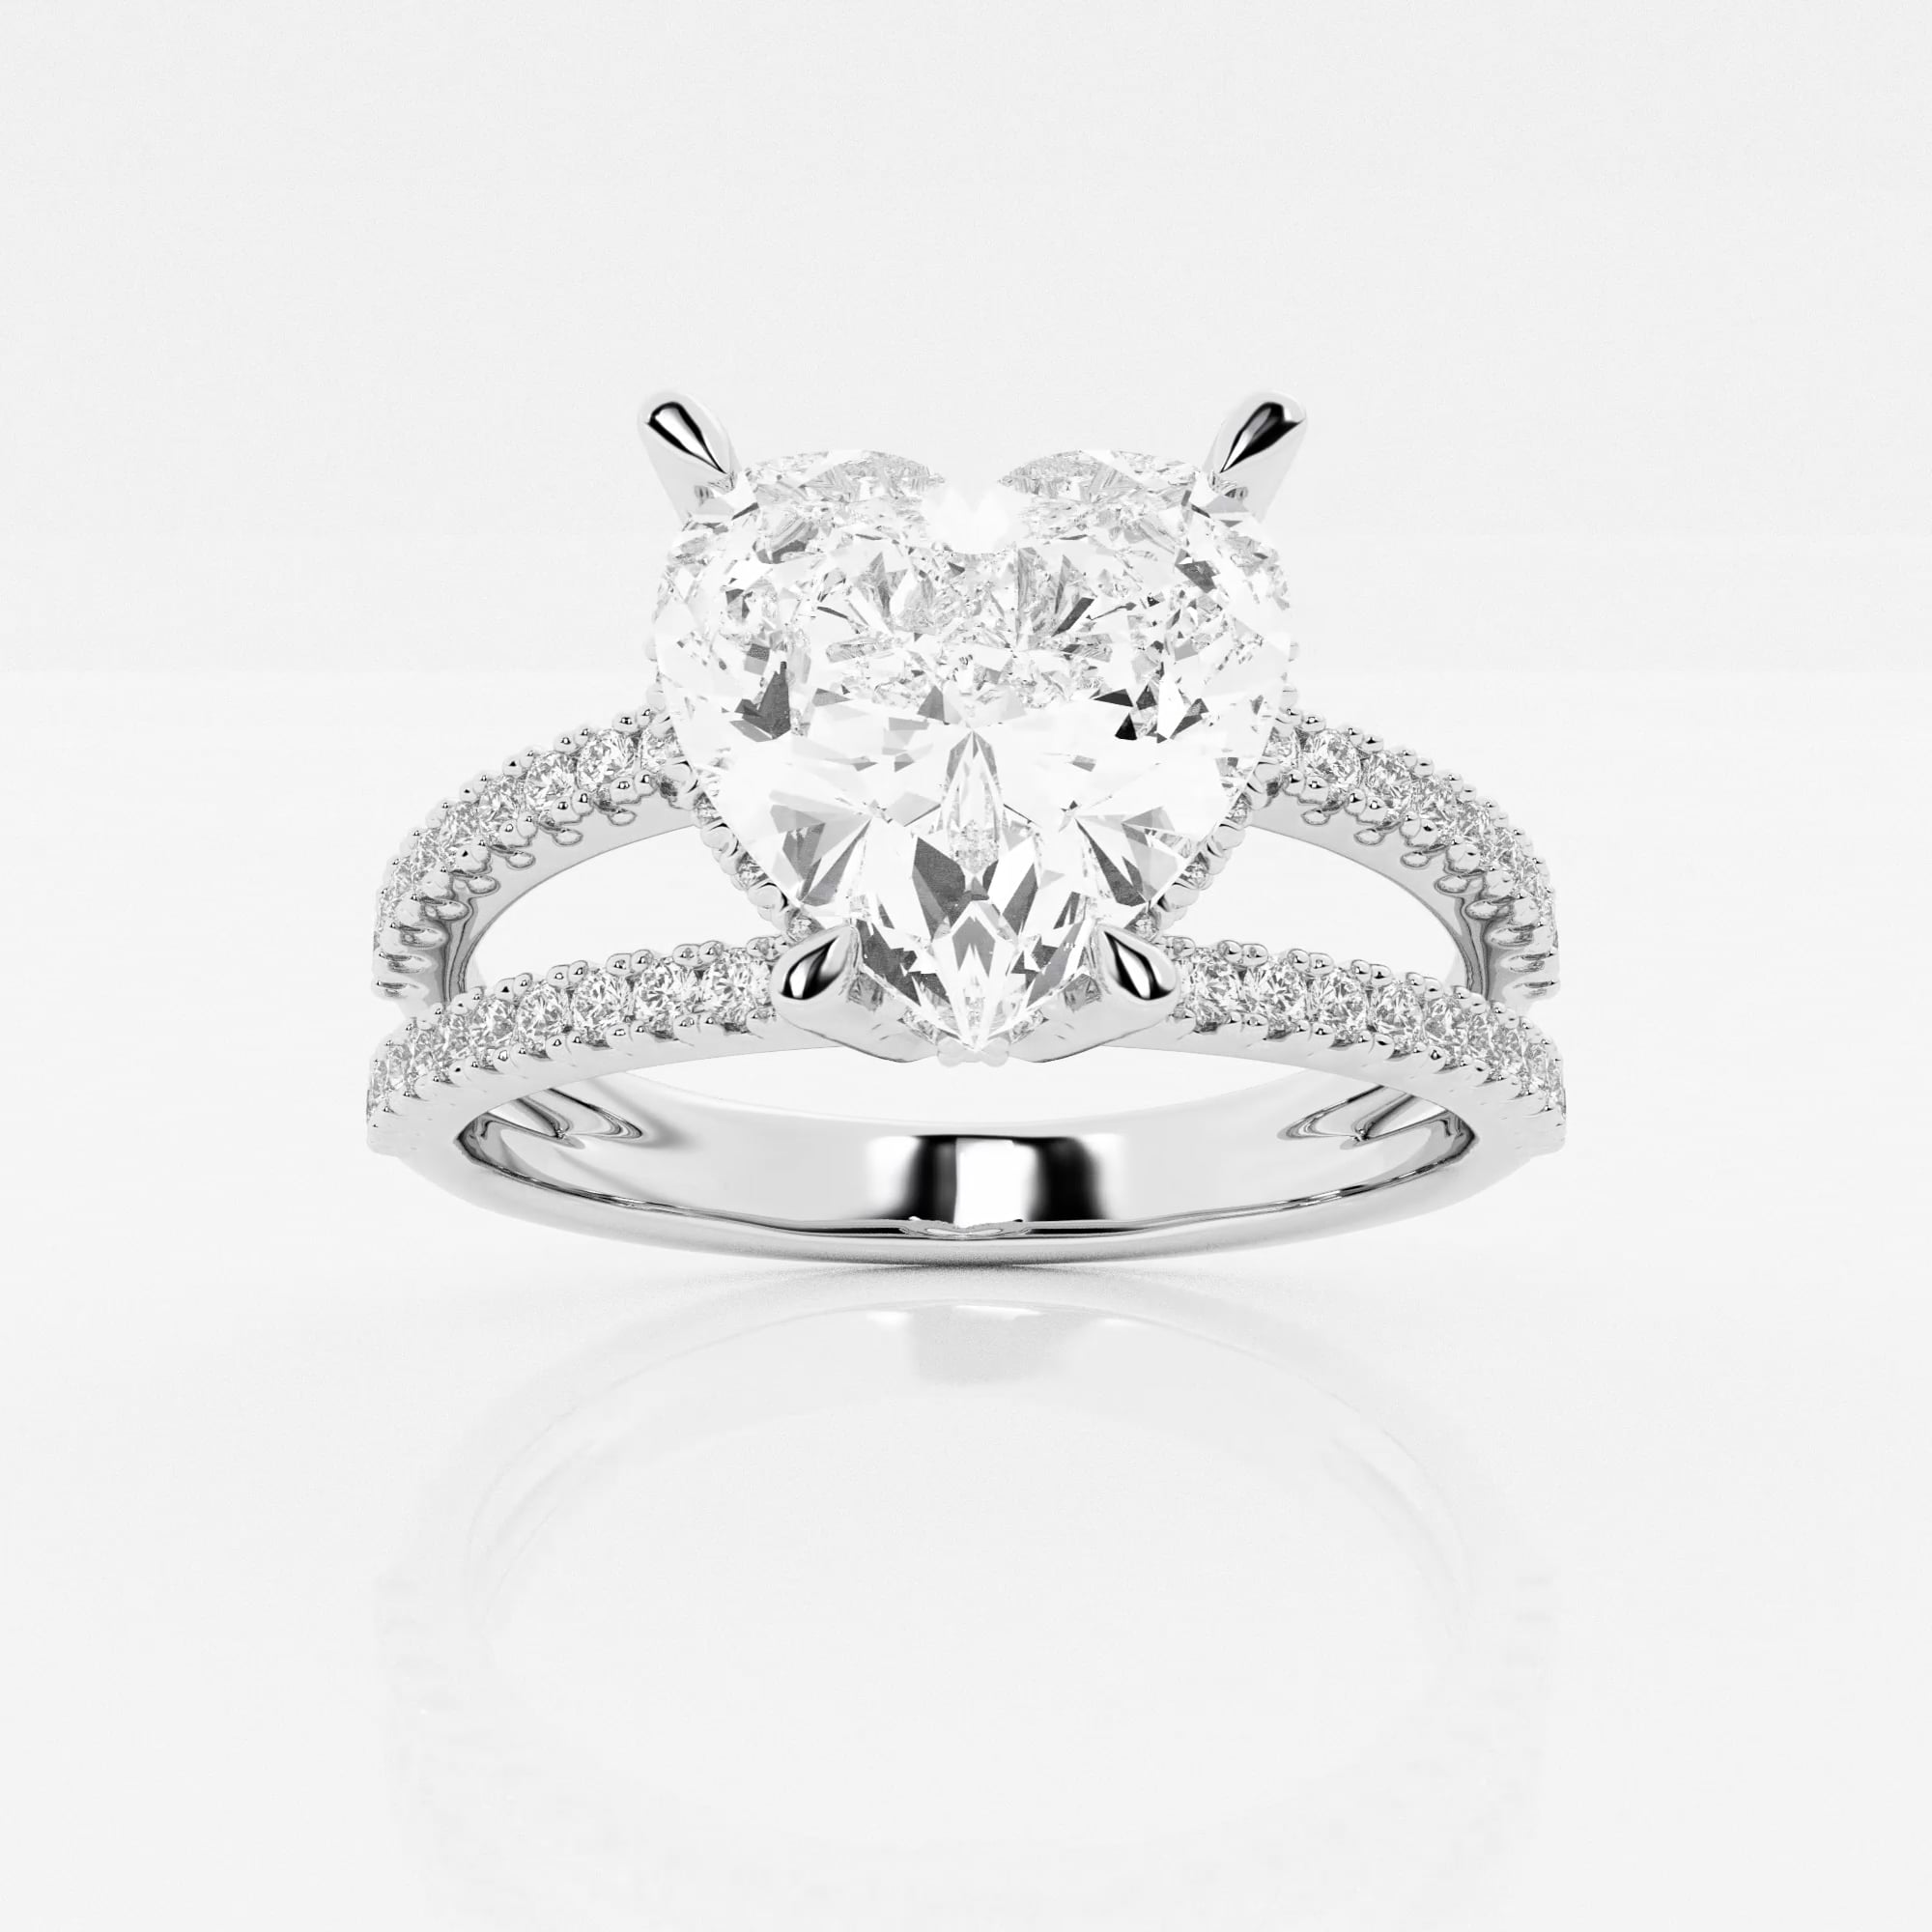 product video for Badgley Mischka Near-Colorless 3 1/3 ctw Heart Lab Grown Diamond Engagement Ring